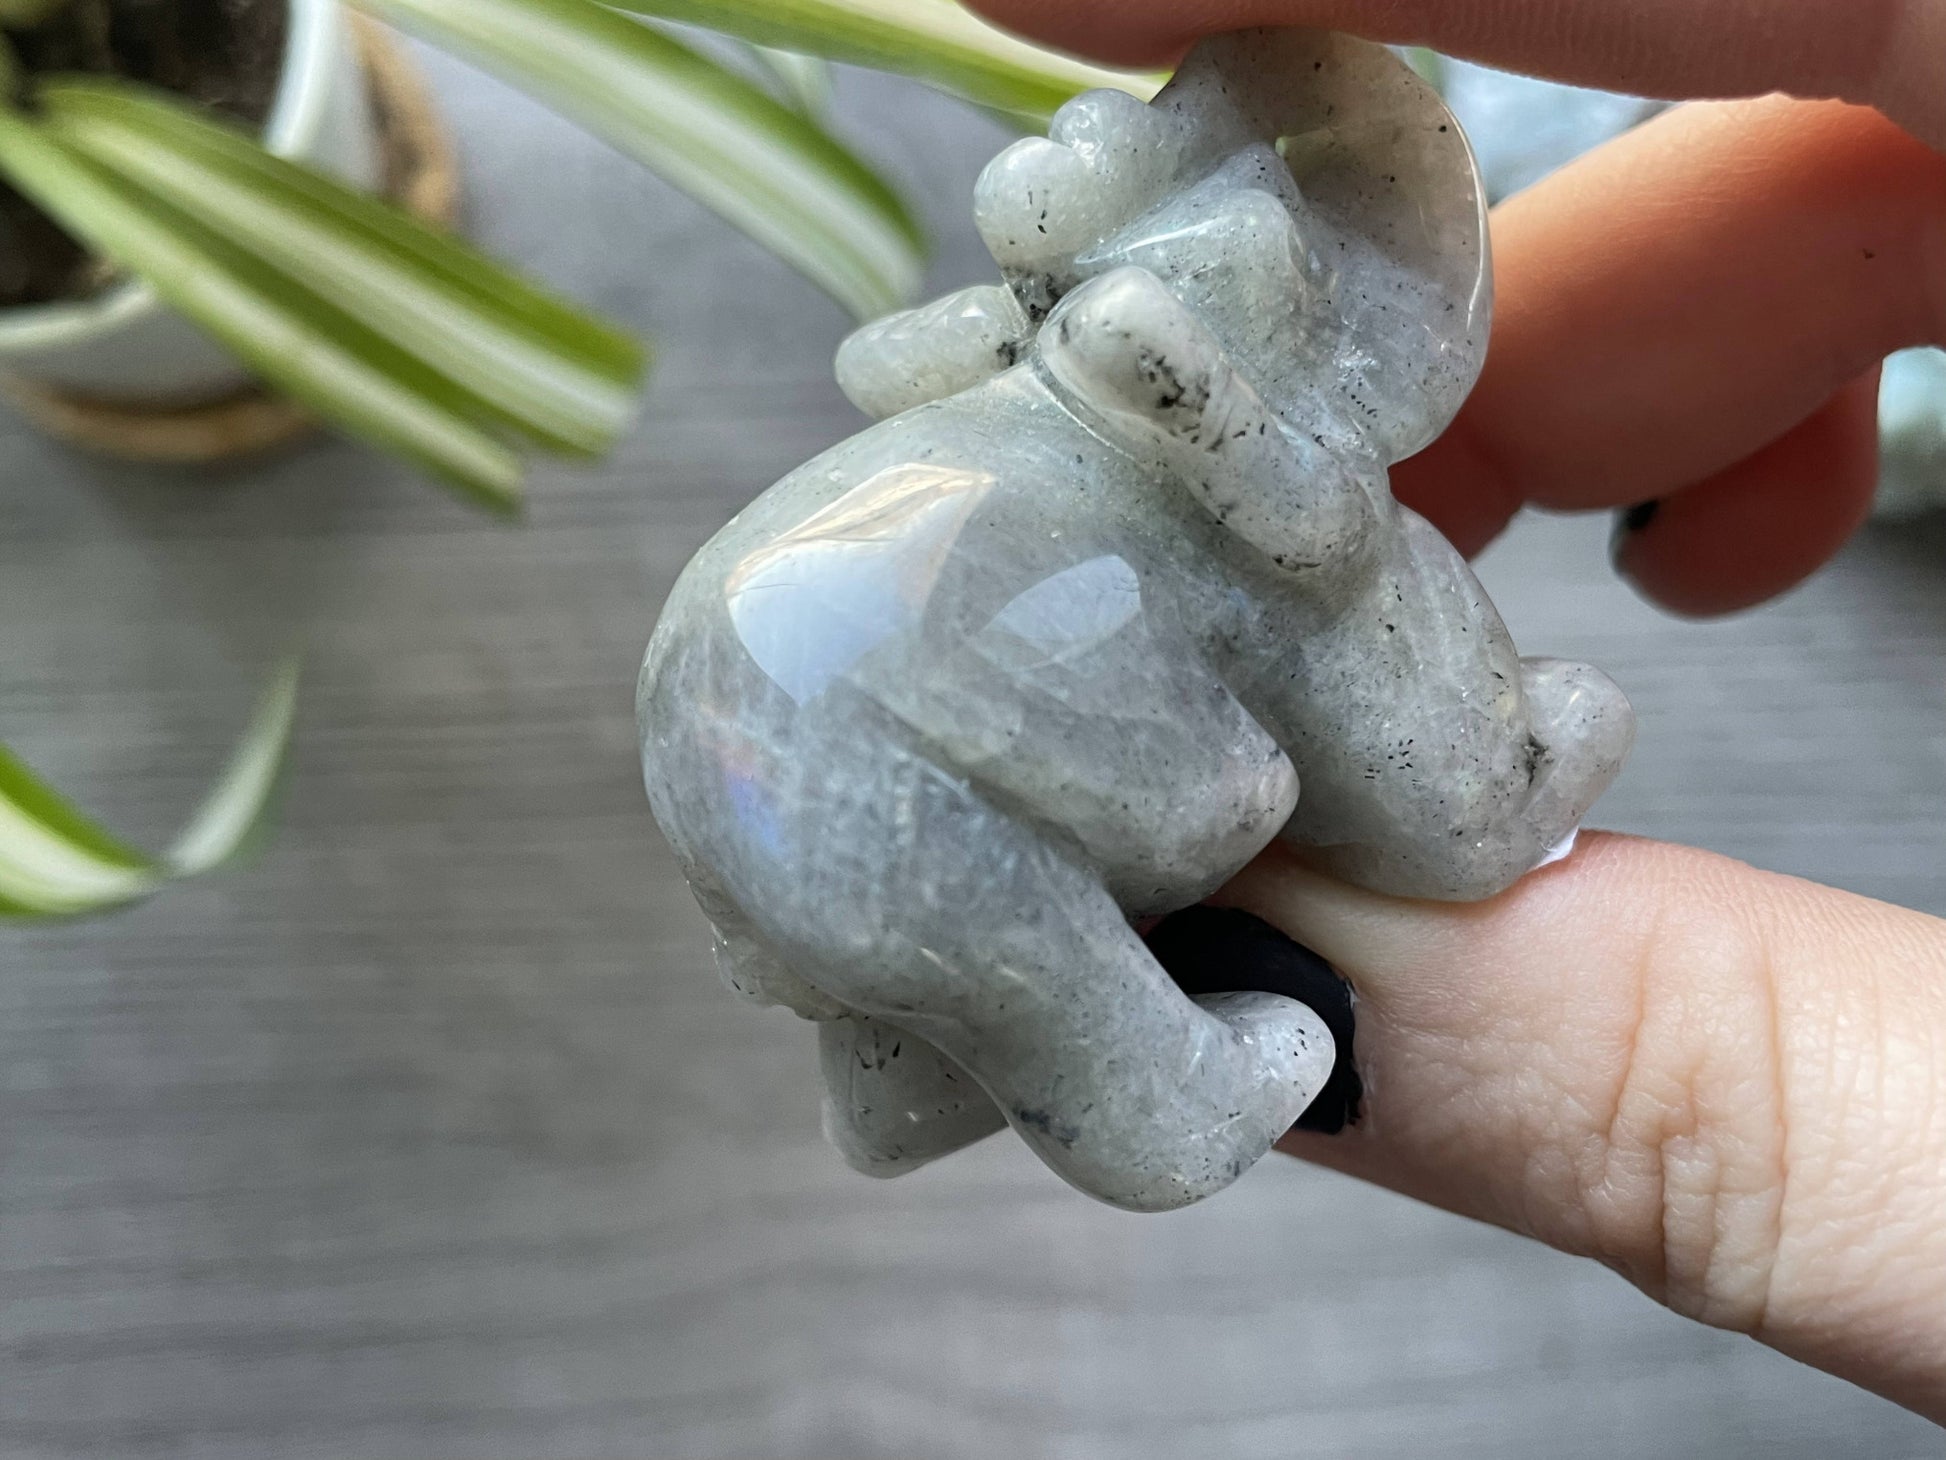 Pictured is an elephant carved out of labradorite.